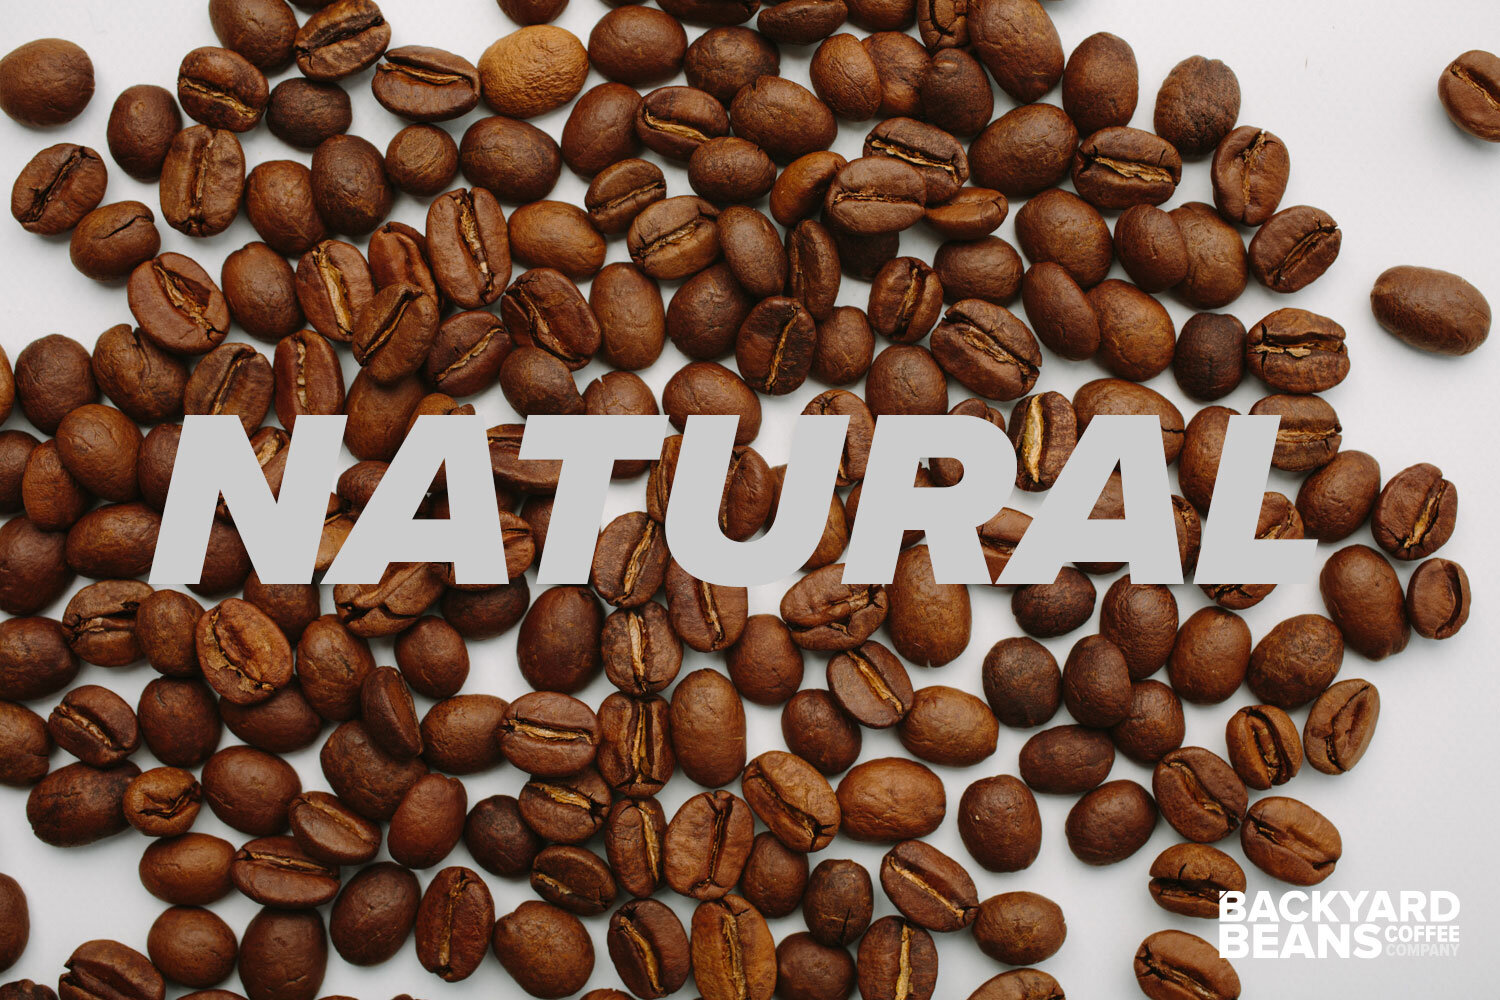 Image showing natural roasted coffee beans